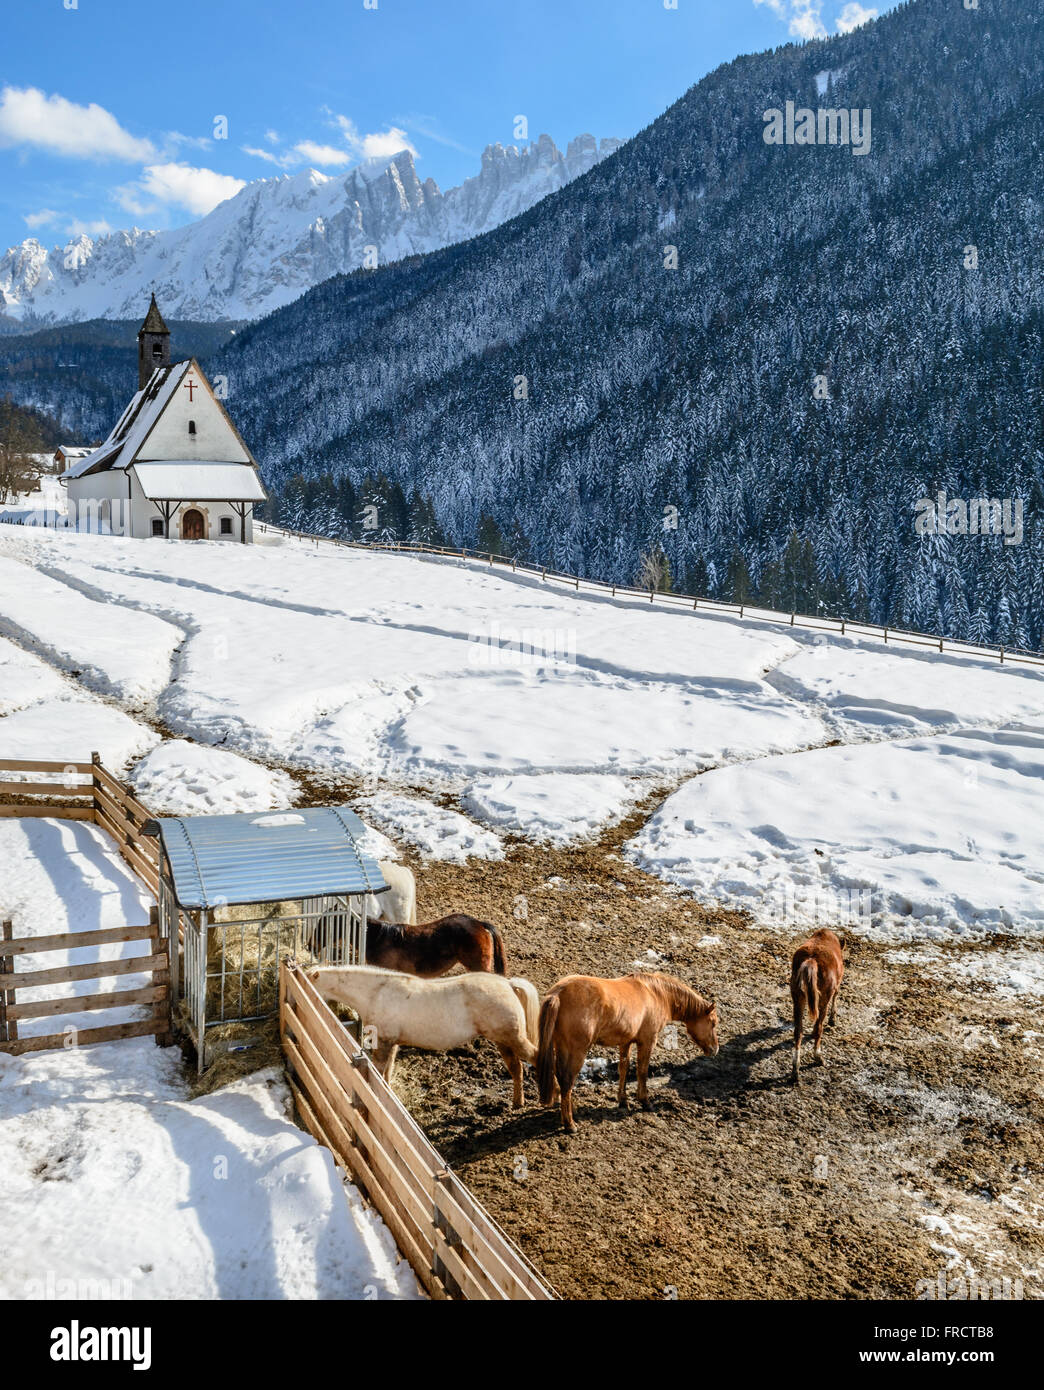 Countryside winter scene with horses and little church, in Nova Levante, Italy Stock Photo